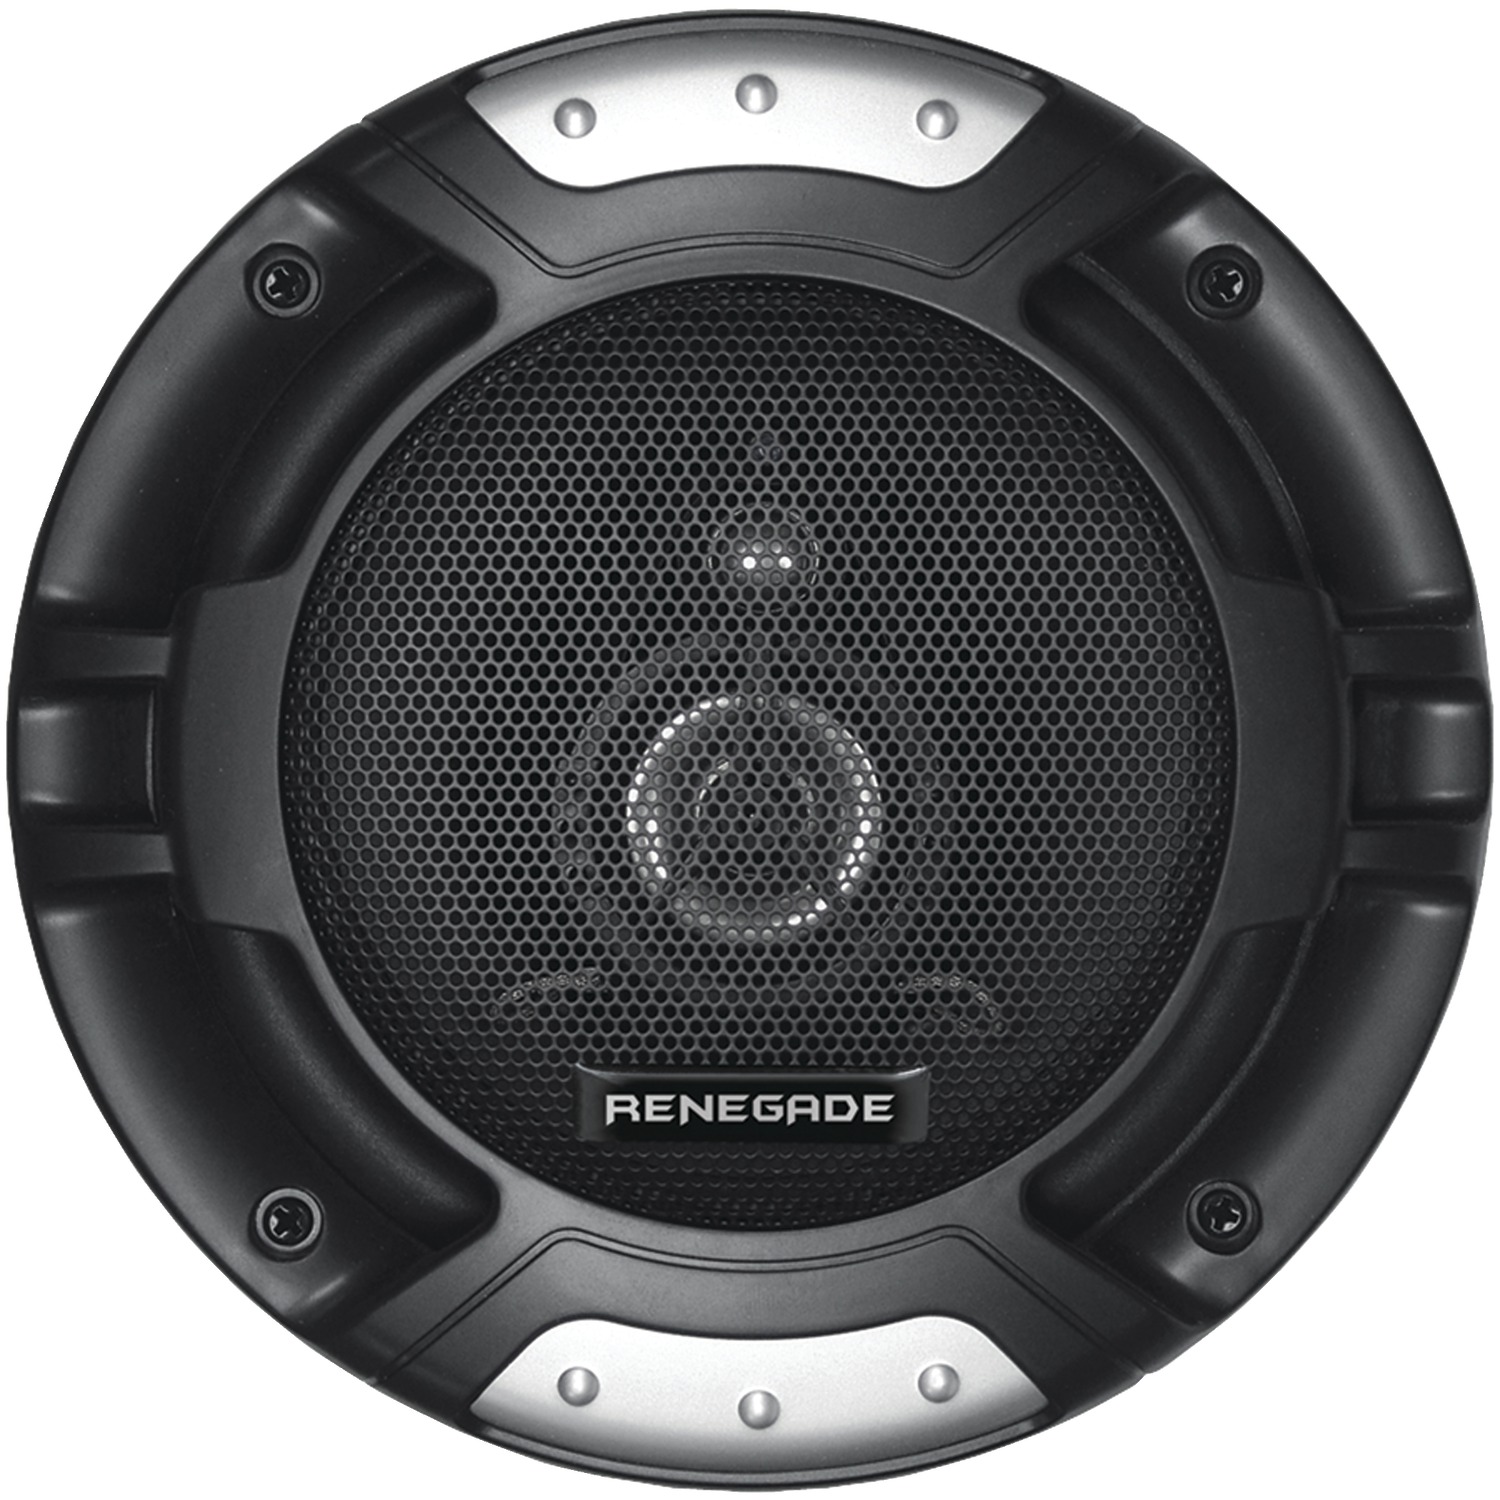 Renegade Rx62 Rx Series Full-range Coaxial Speakers (6.5", 2 Way) - image 3 of 5